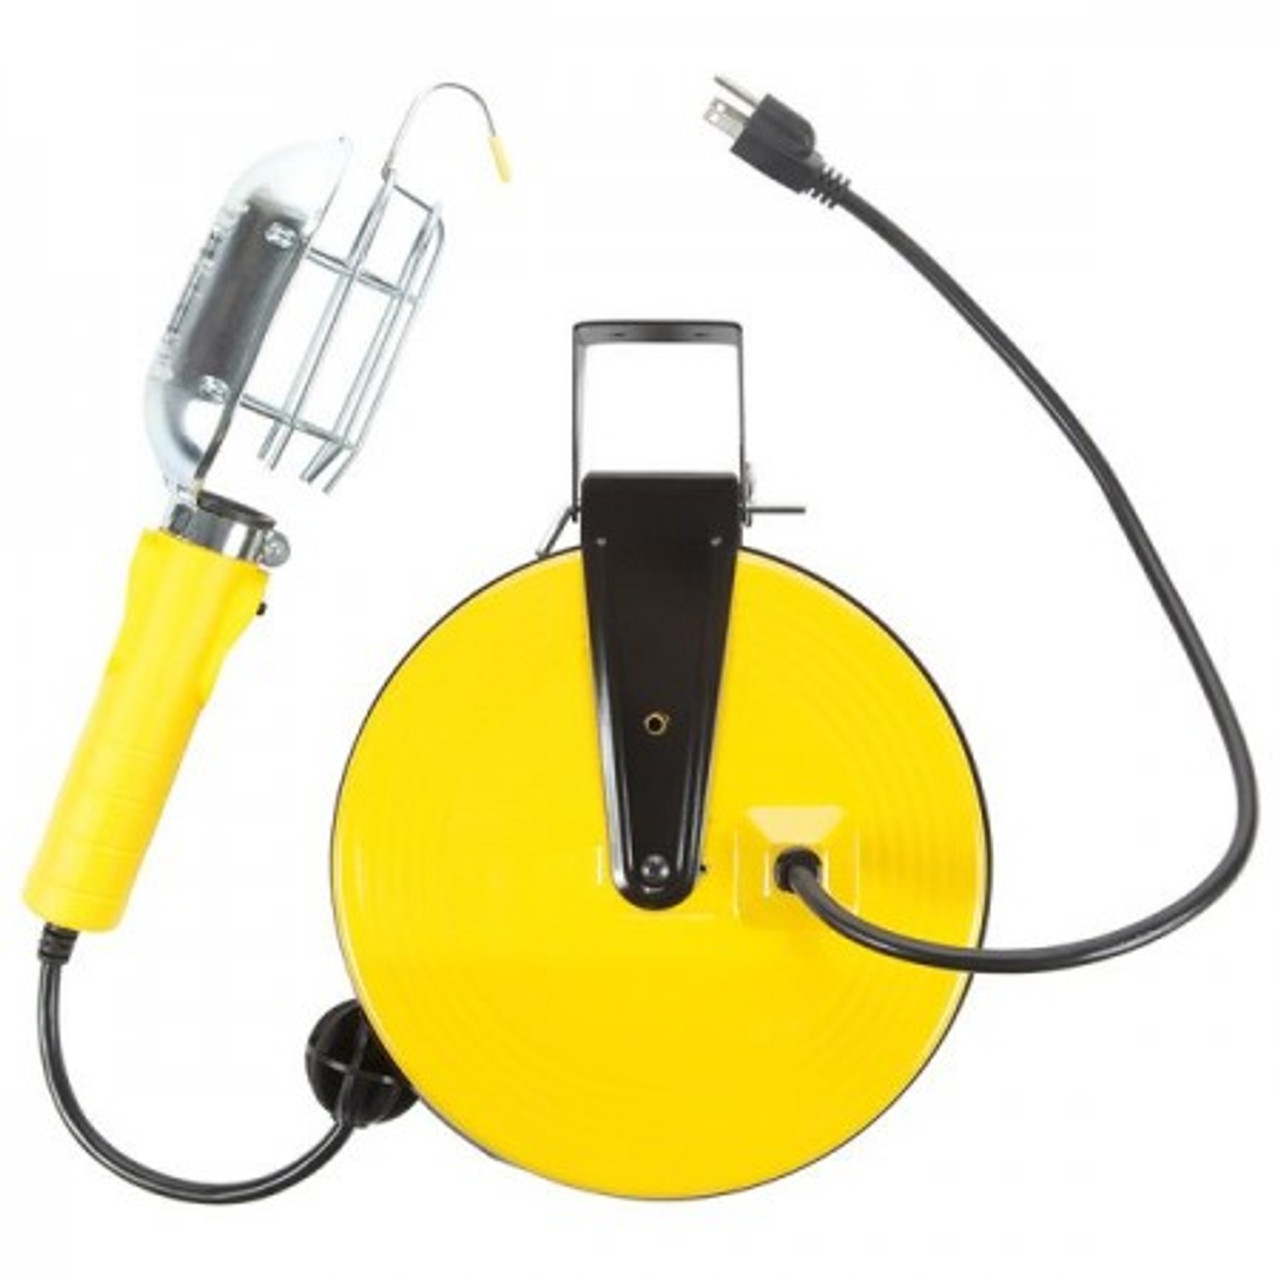 Bayco SL-840 Incandescent Work Light w/Metal Guard & Single Outlet ...